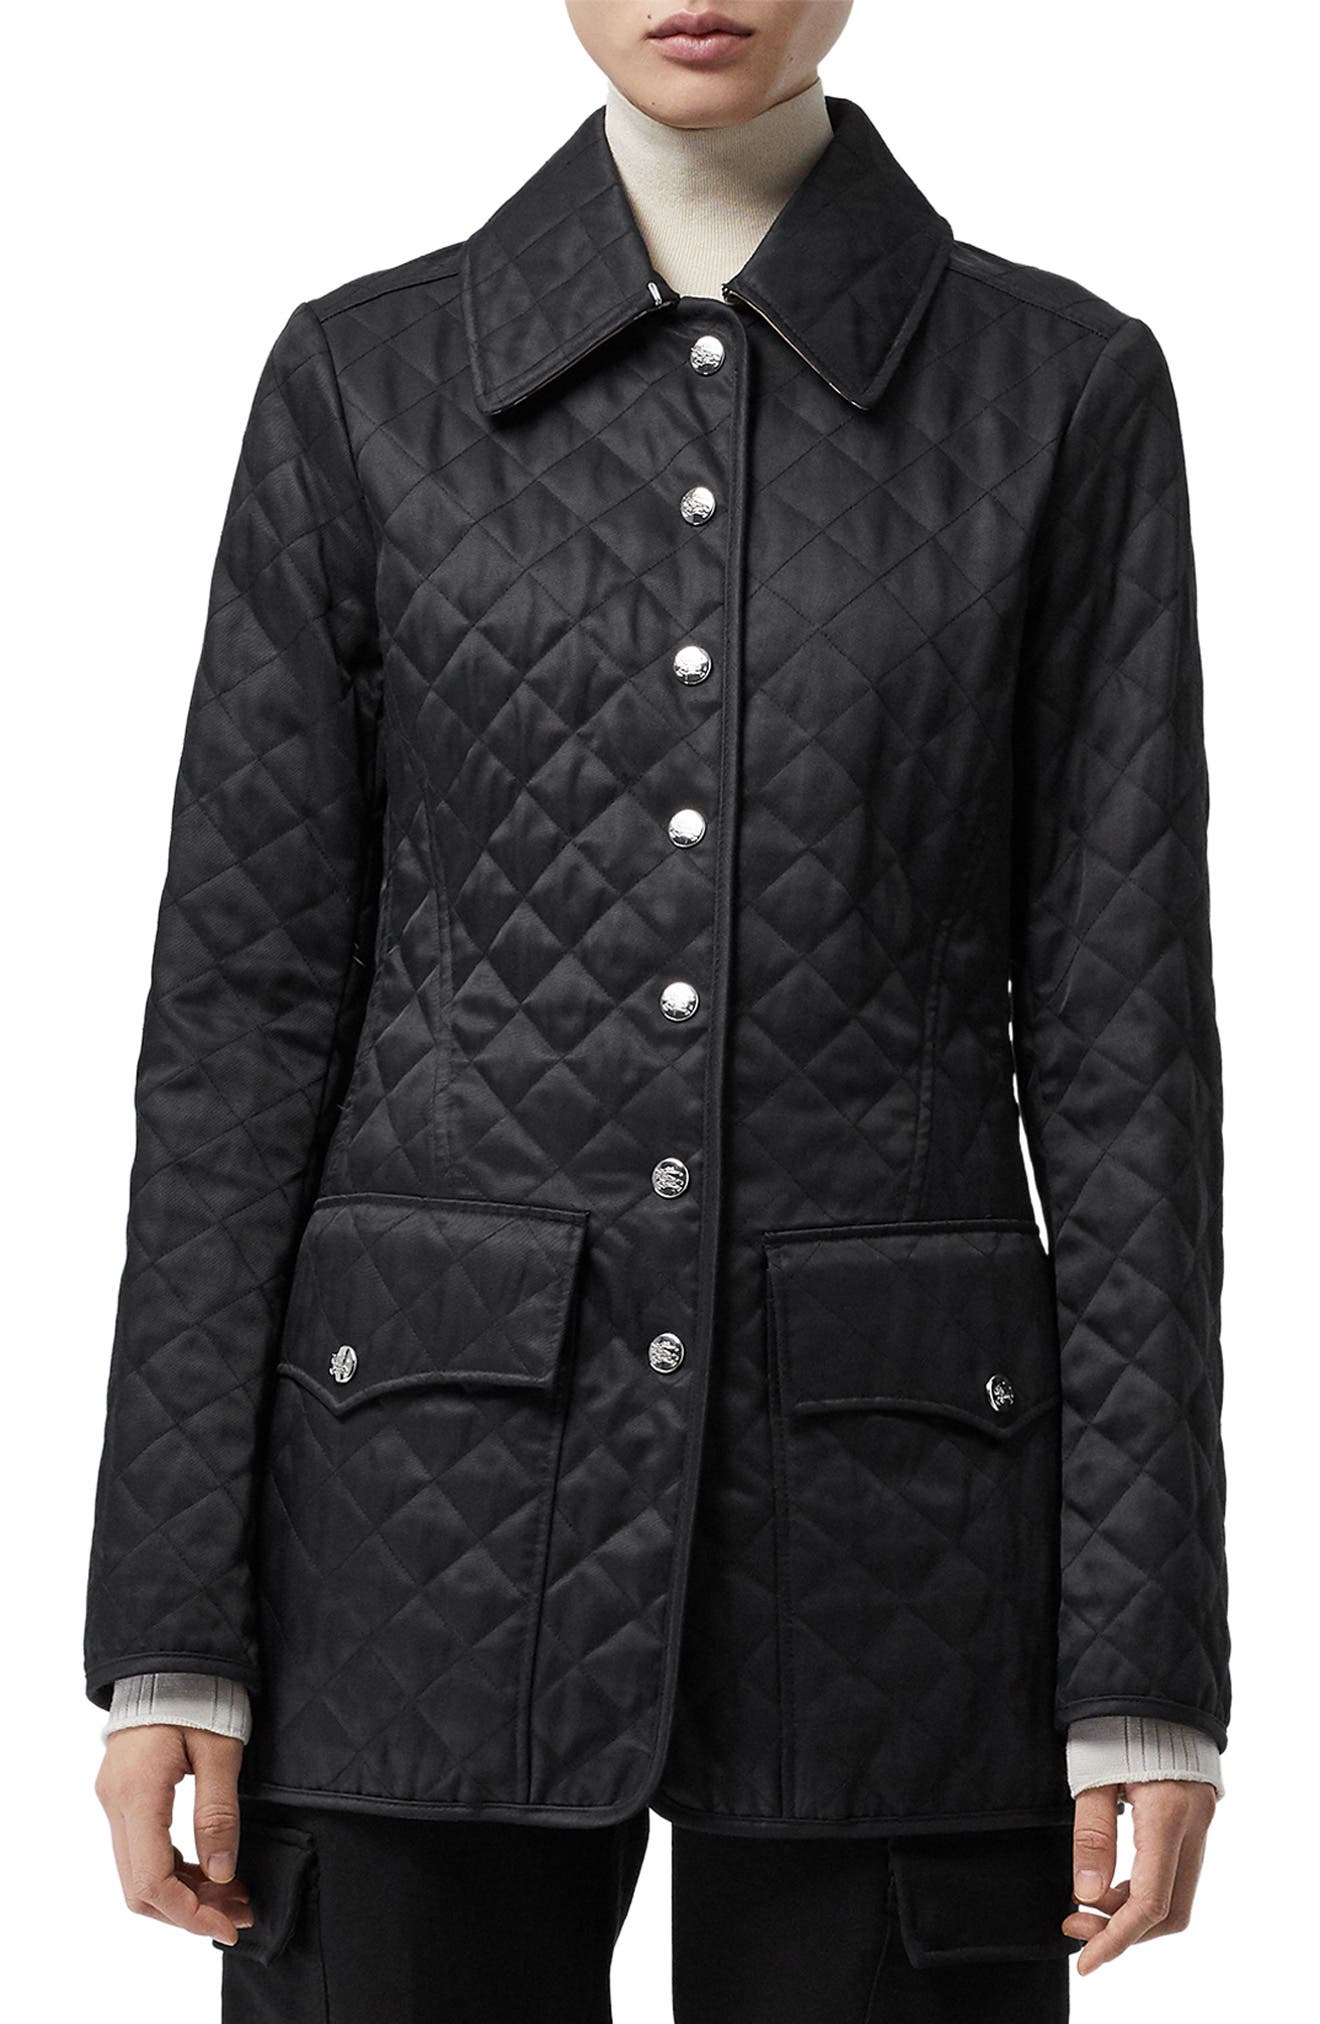 burberry jackets nordstrom